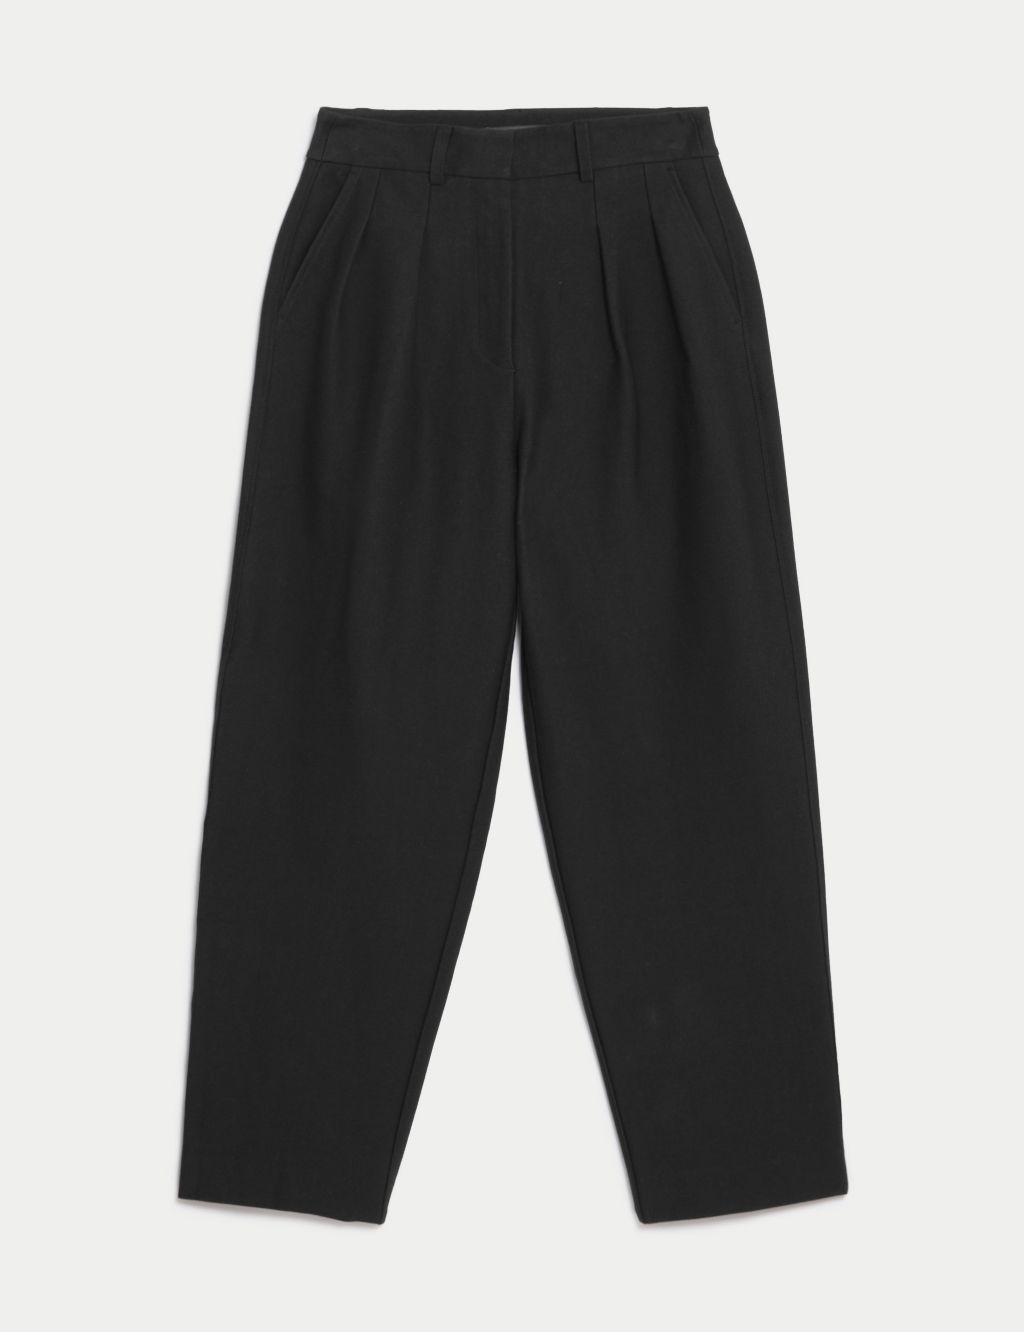 Jersey Tapered Ankle Grazer Trousers image 2